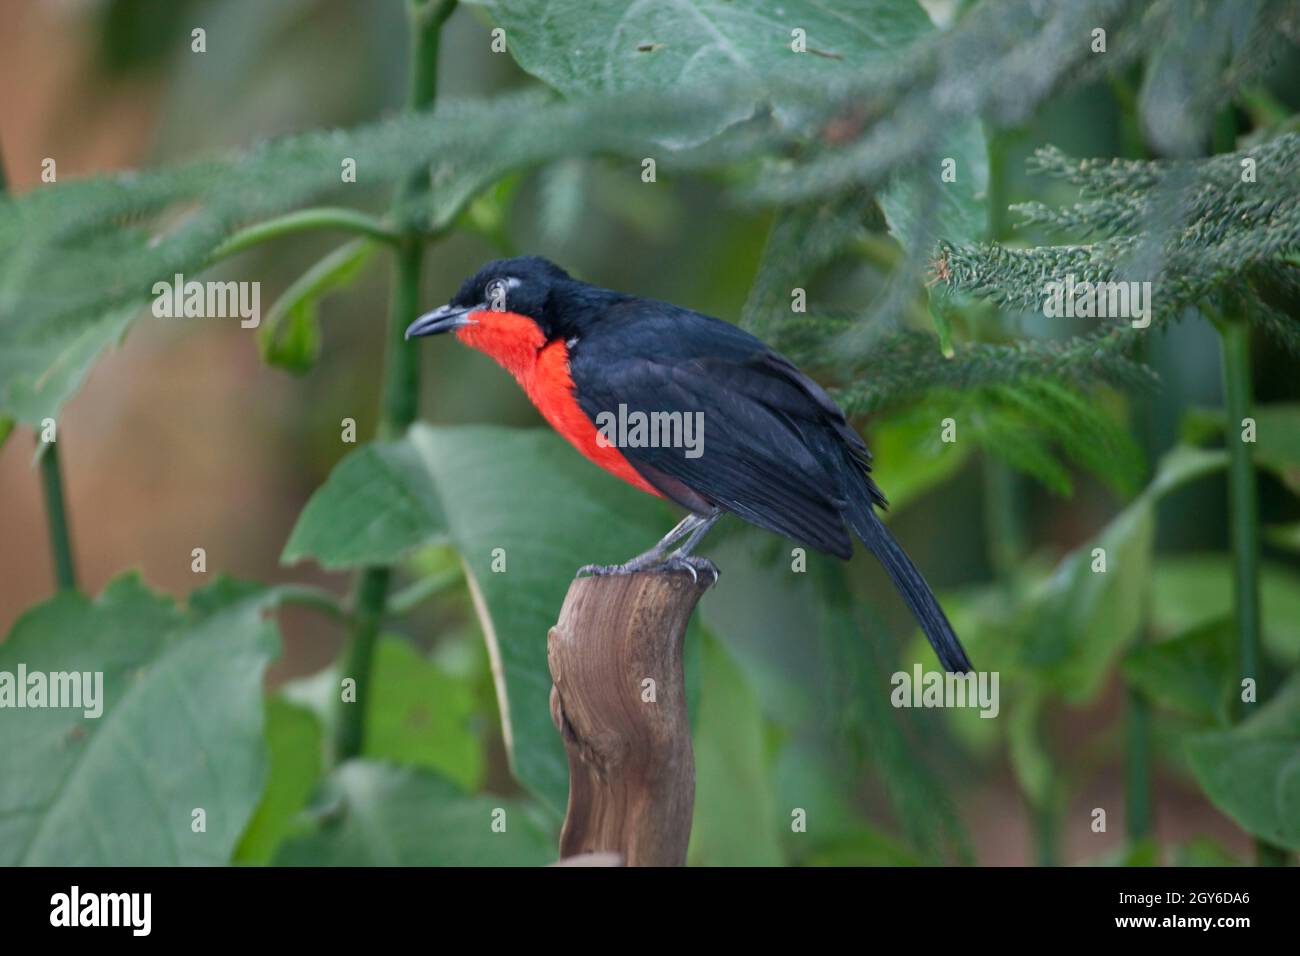 A Black-headed Gonolek, Laniarius erythrogaster, perched on branch Stock Photo